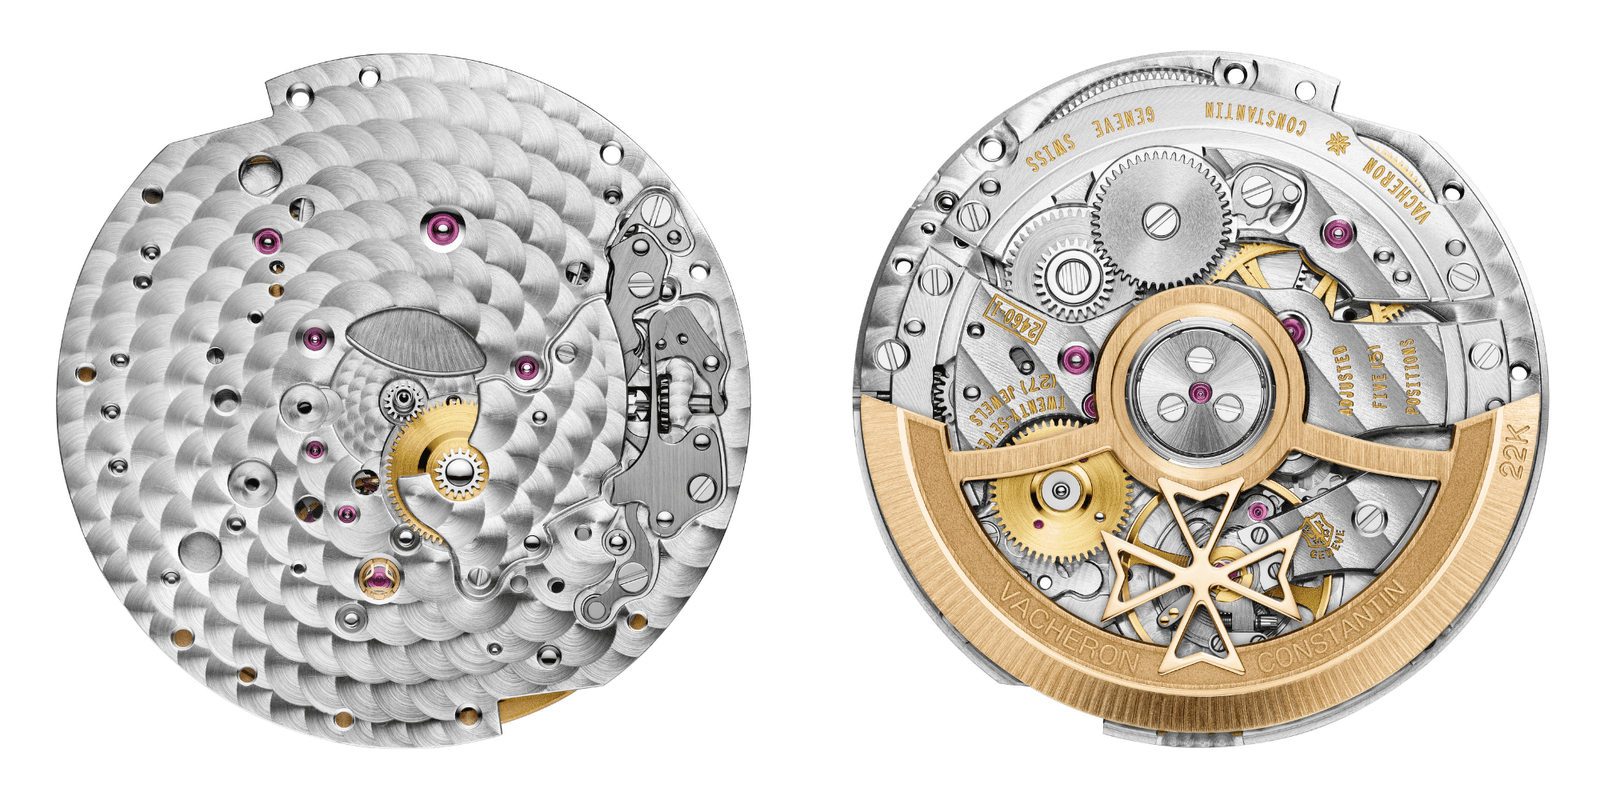 The fine finishing on the surfaces of the caliber 2460 SC/3